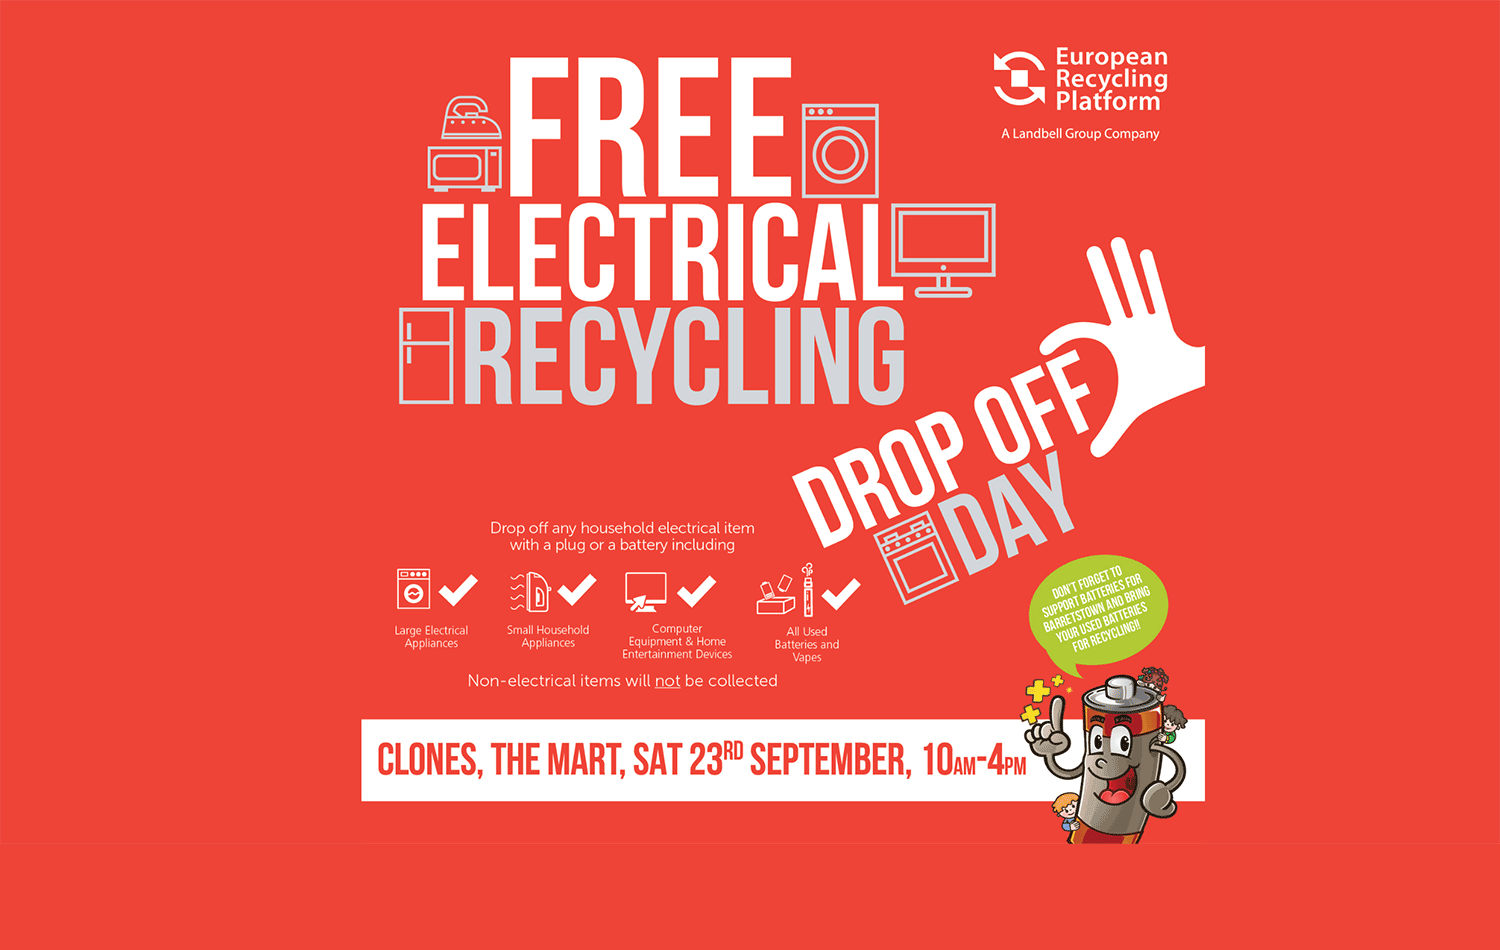 https://monaghan.ie/electrical-recycling-drop-off-days-the-mart-clones-monaghan/